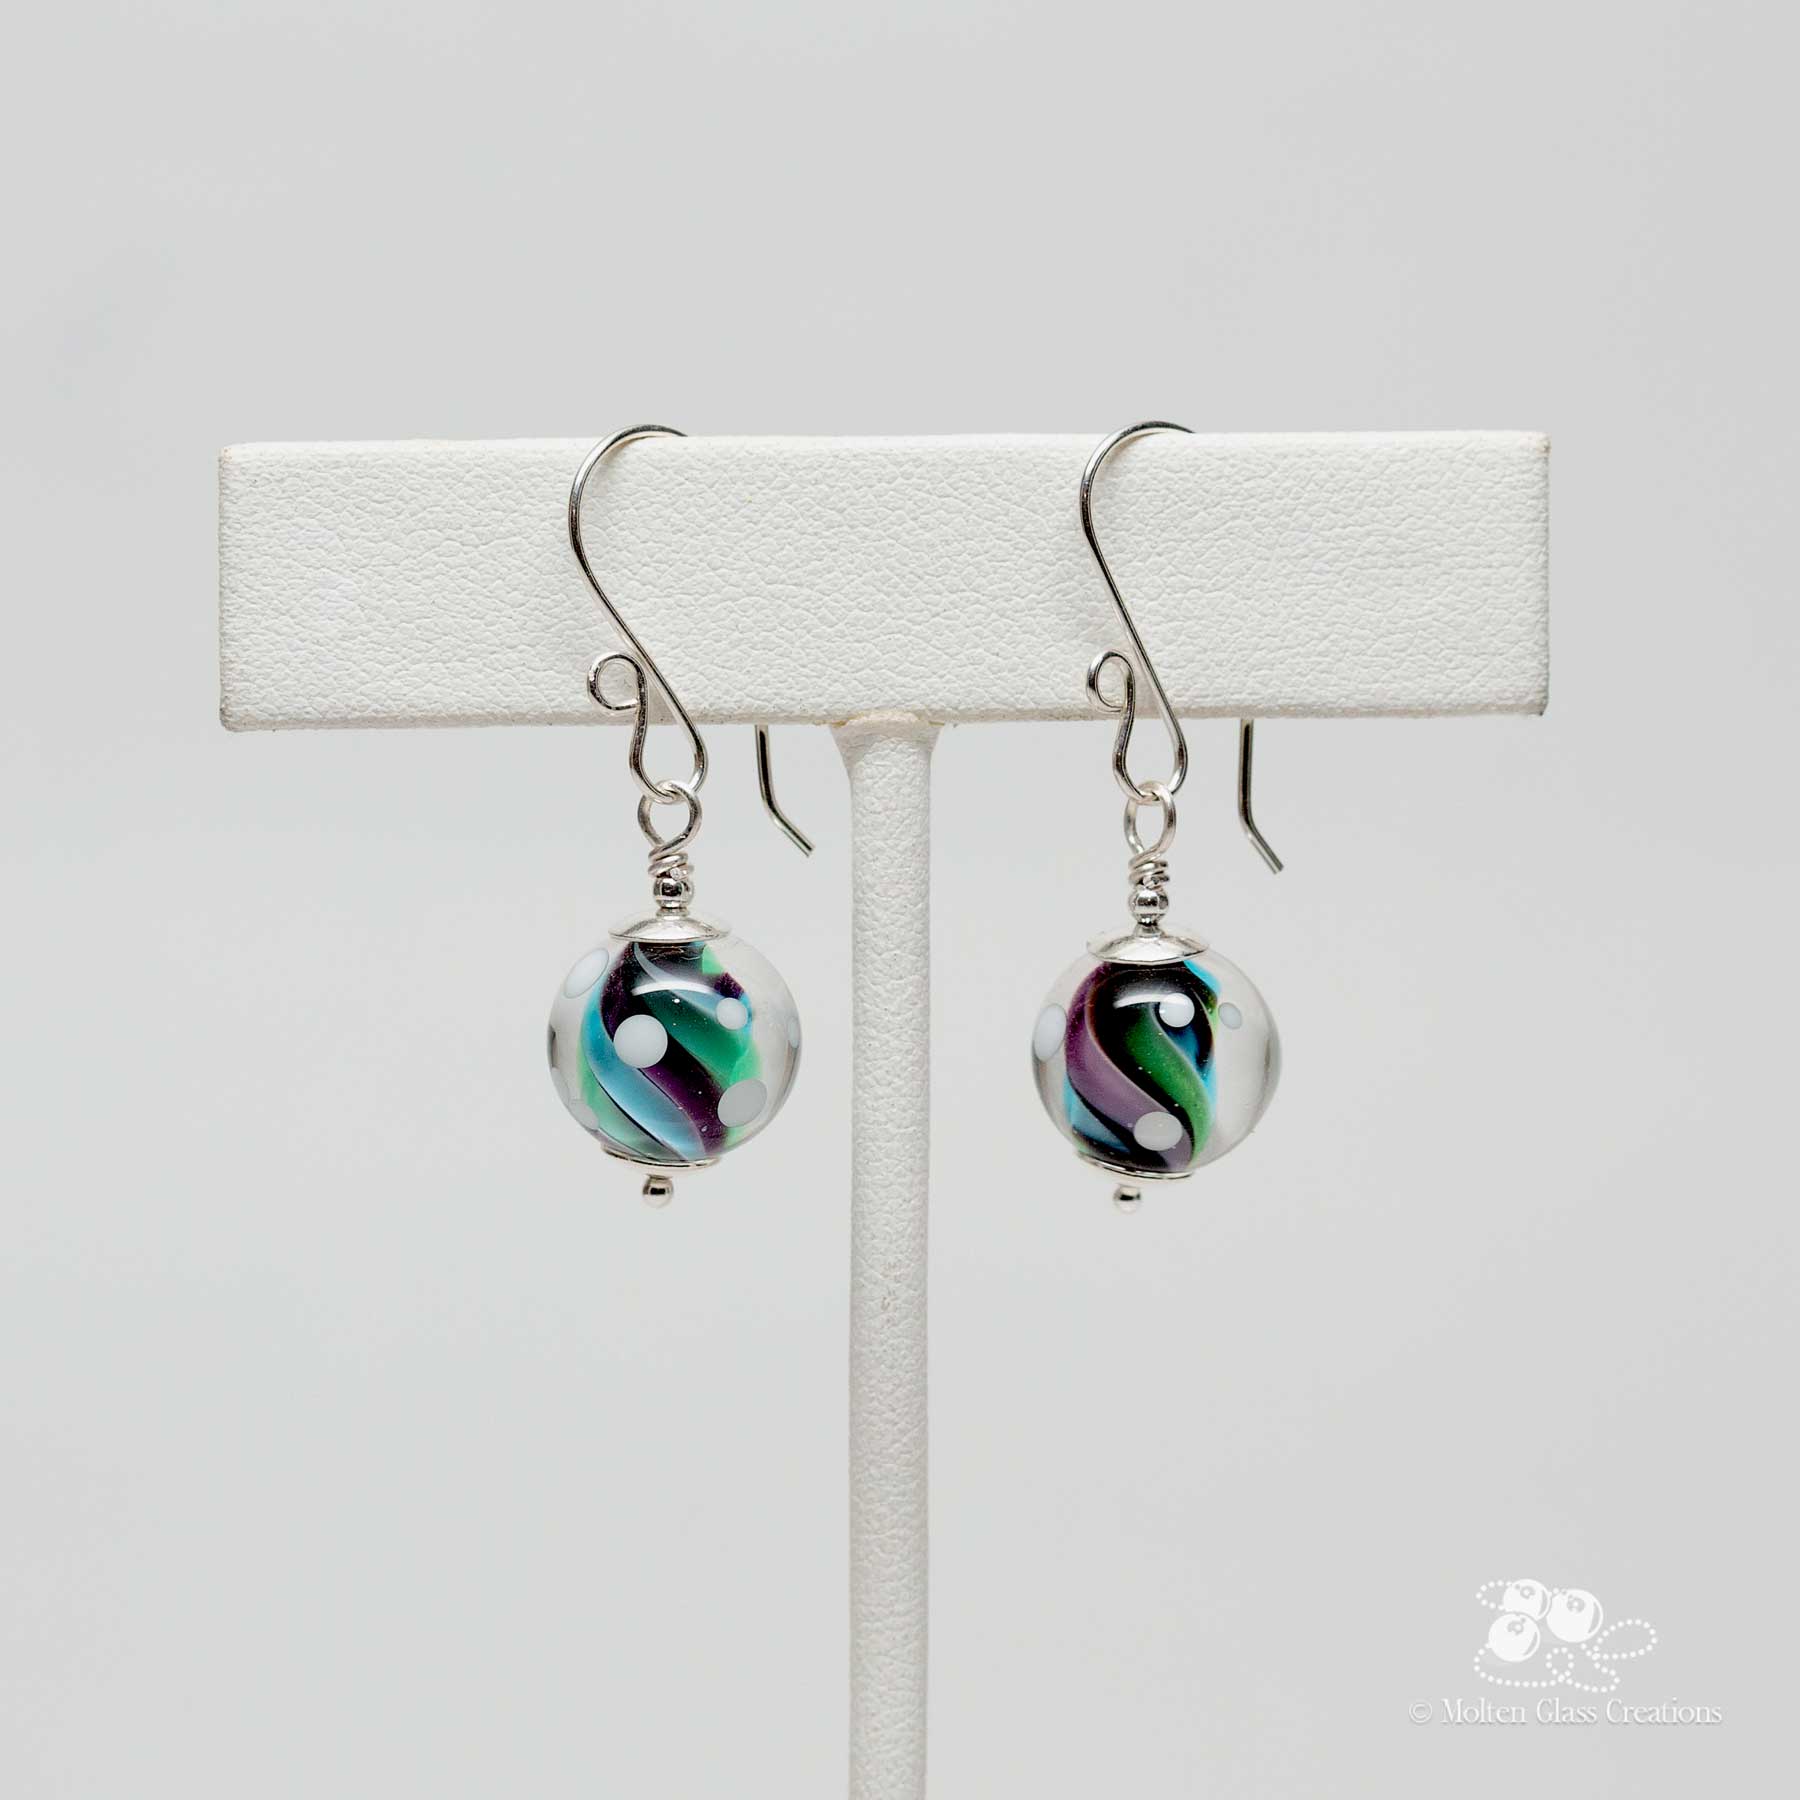 earrings with a marble style twist and look